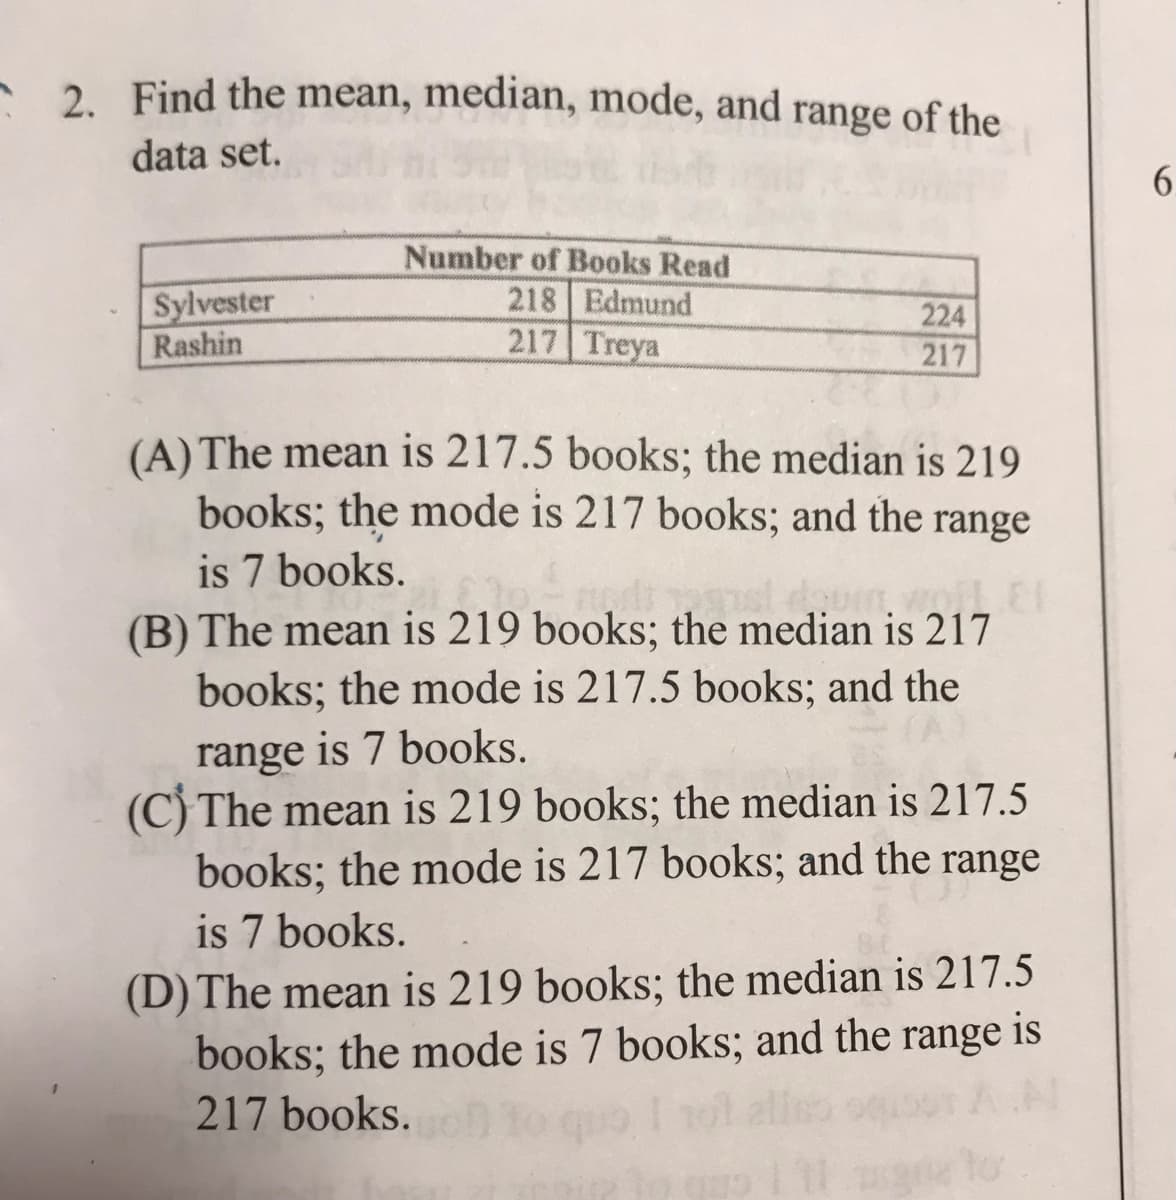 - 2 Find the mean, median, mode, and range of the
data set.
6.
Sylvester
Rashin
Number of Books Read
218 Edmund
217 Treya
224
217
(A) The mean is 217.5 books; the median is 219
books; the mode is 217 books; and the range
is 7 books.
(B) The mean is 219 books; the median is 217
books; the mode is 217.5 books; and the
range is 7 books.
(C) The mean is 219 books; the median is 217.5
books; the mode is 217 books; and the range
is 7 books.
(D) The mean is 219 books; the median is 217.5
books; the mode is 7 books; and the range is
217 books.
